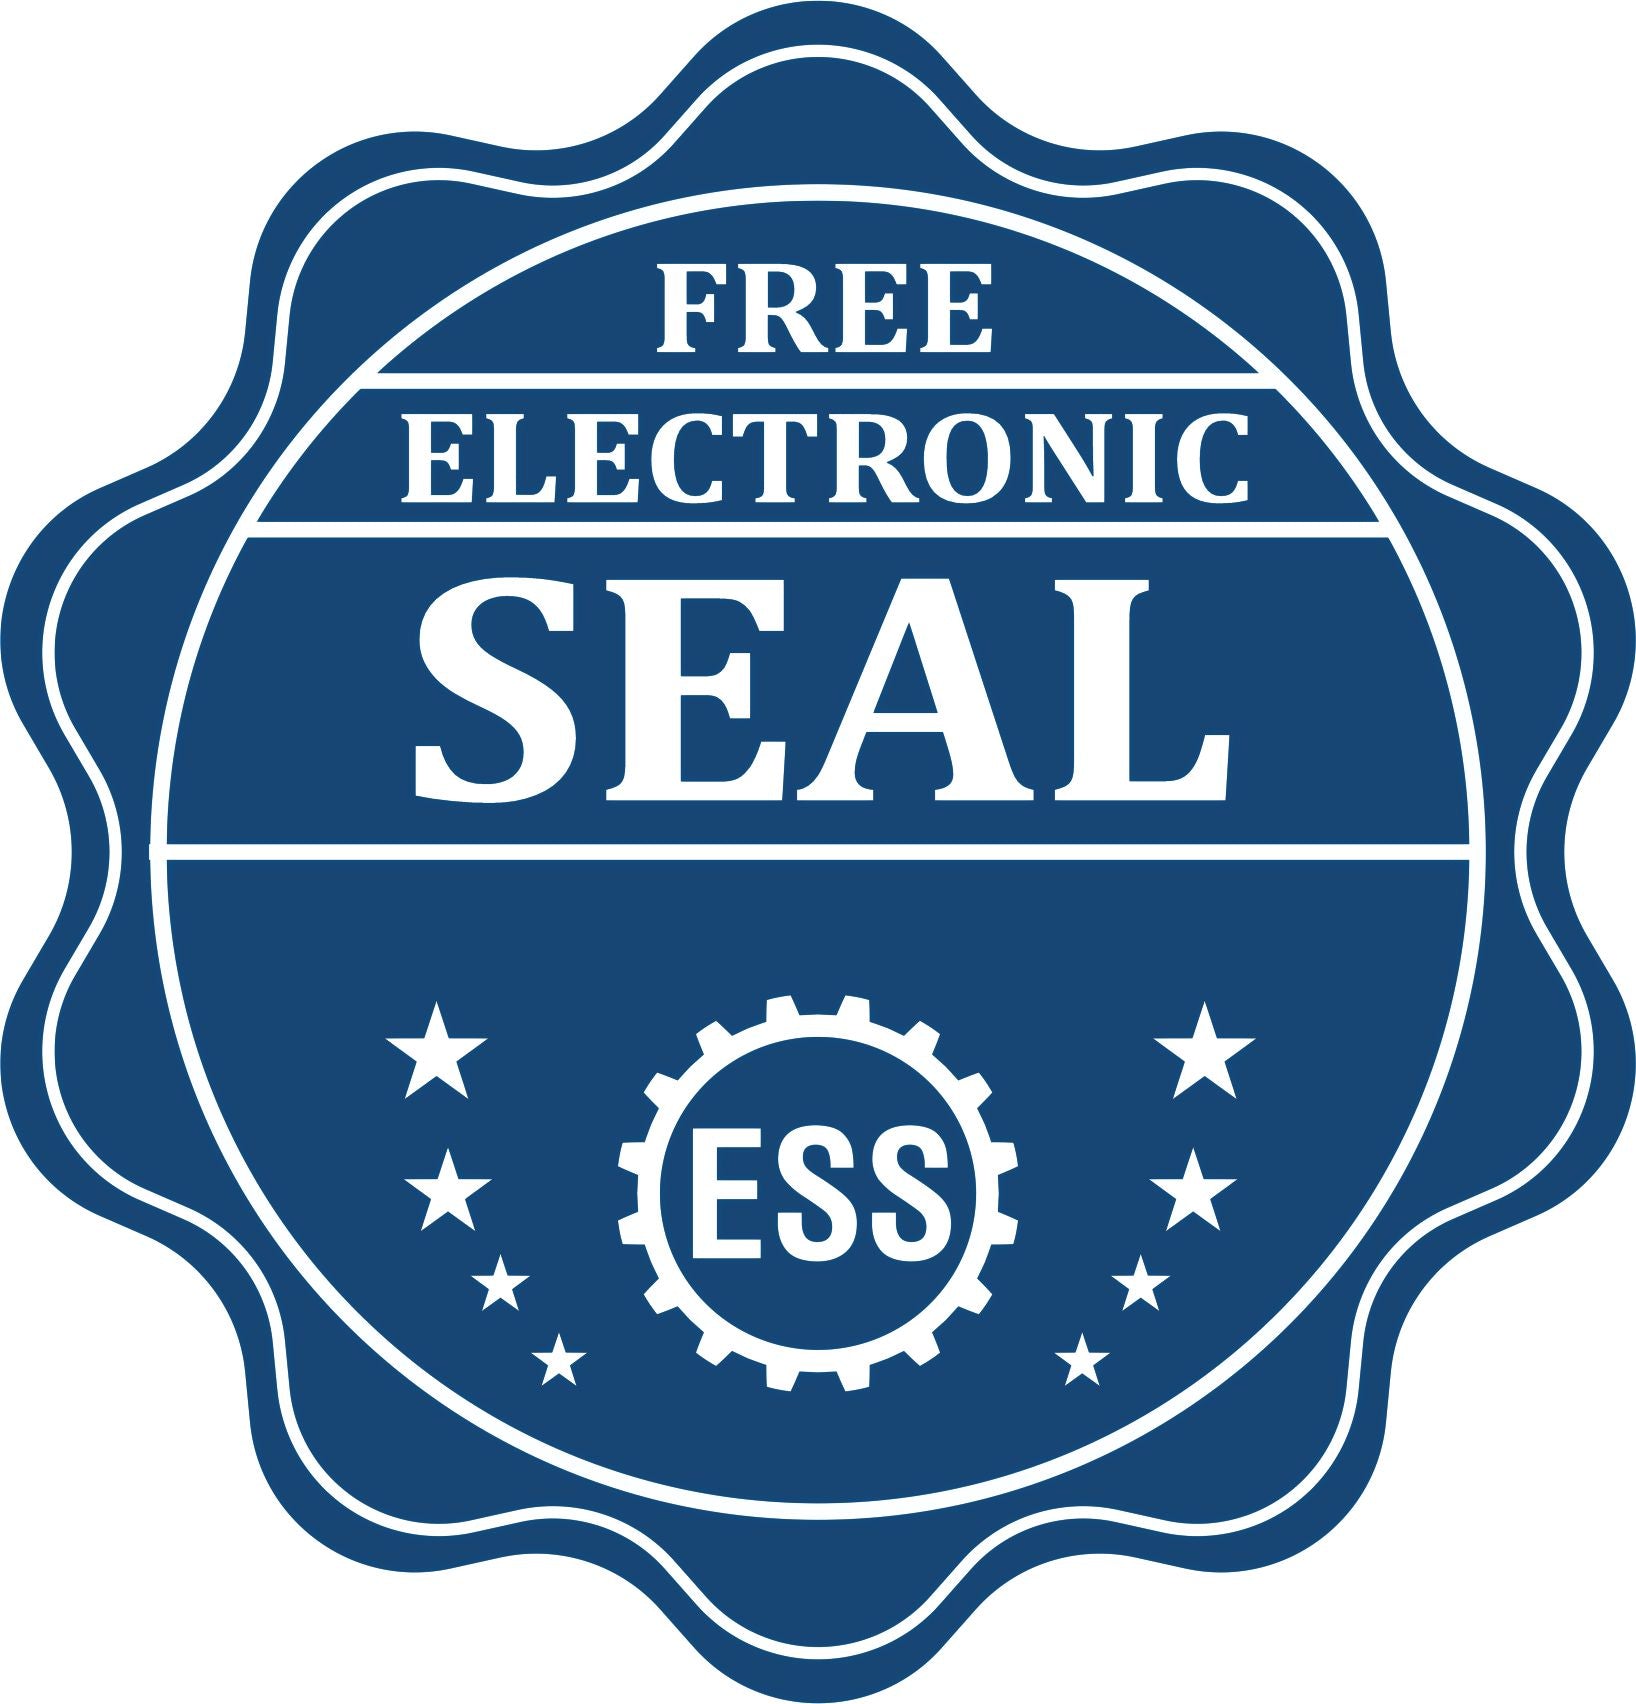 A badge showing a free electronic seal for the Wooden Handle Rhode Island Rectangular Notary Public Stamp with stars and the ESS gear on the emblem.